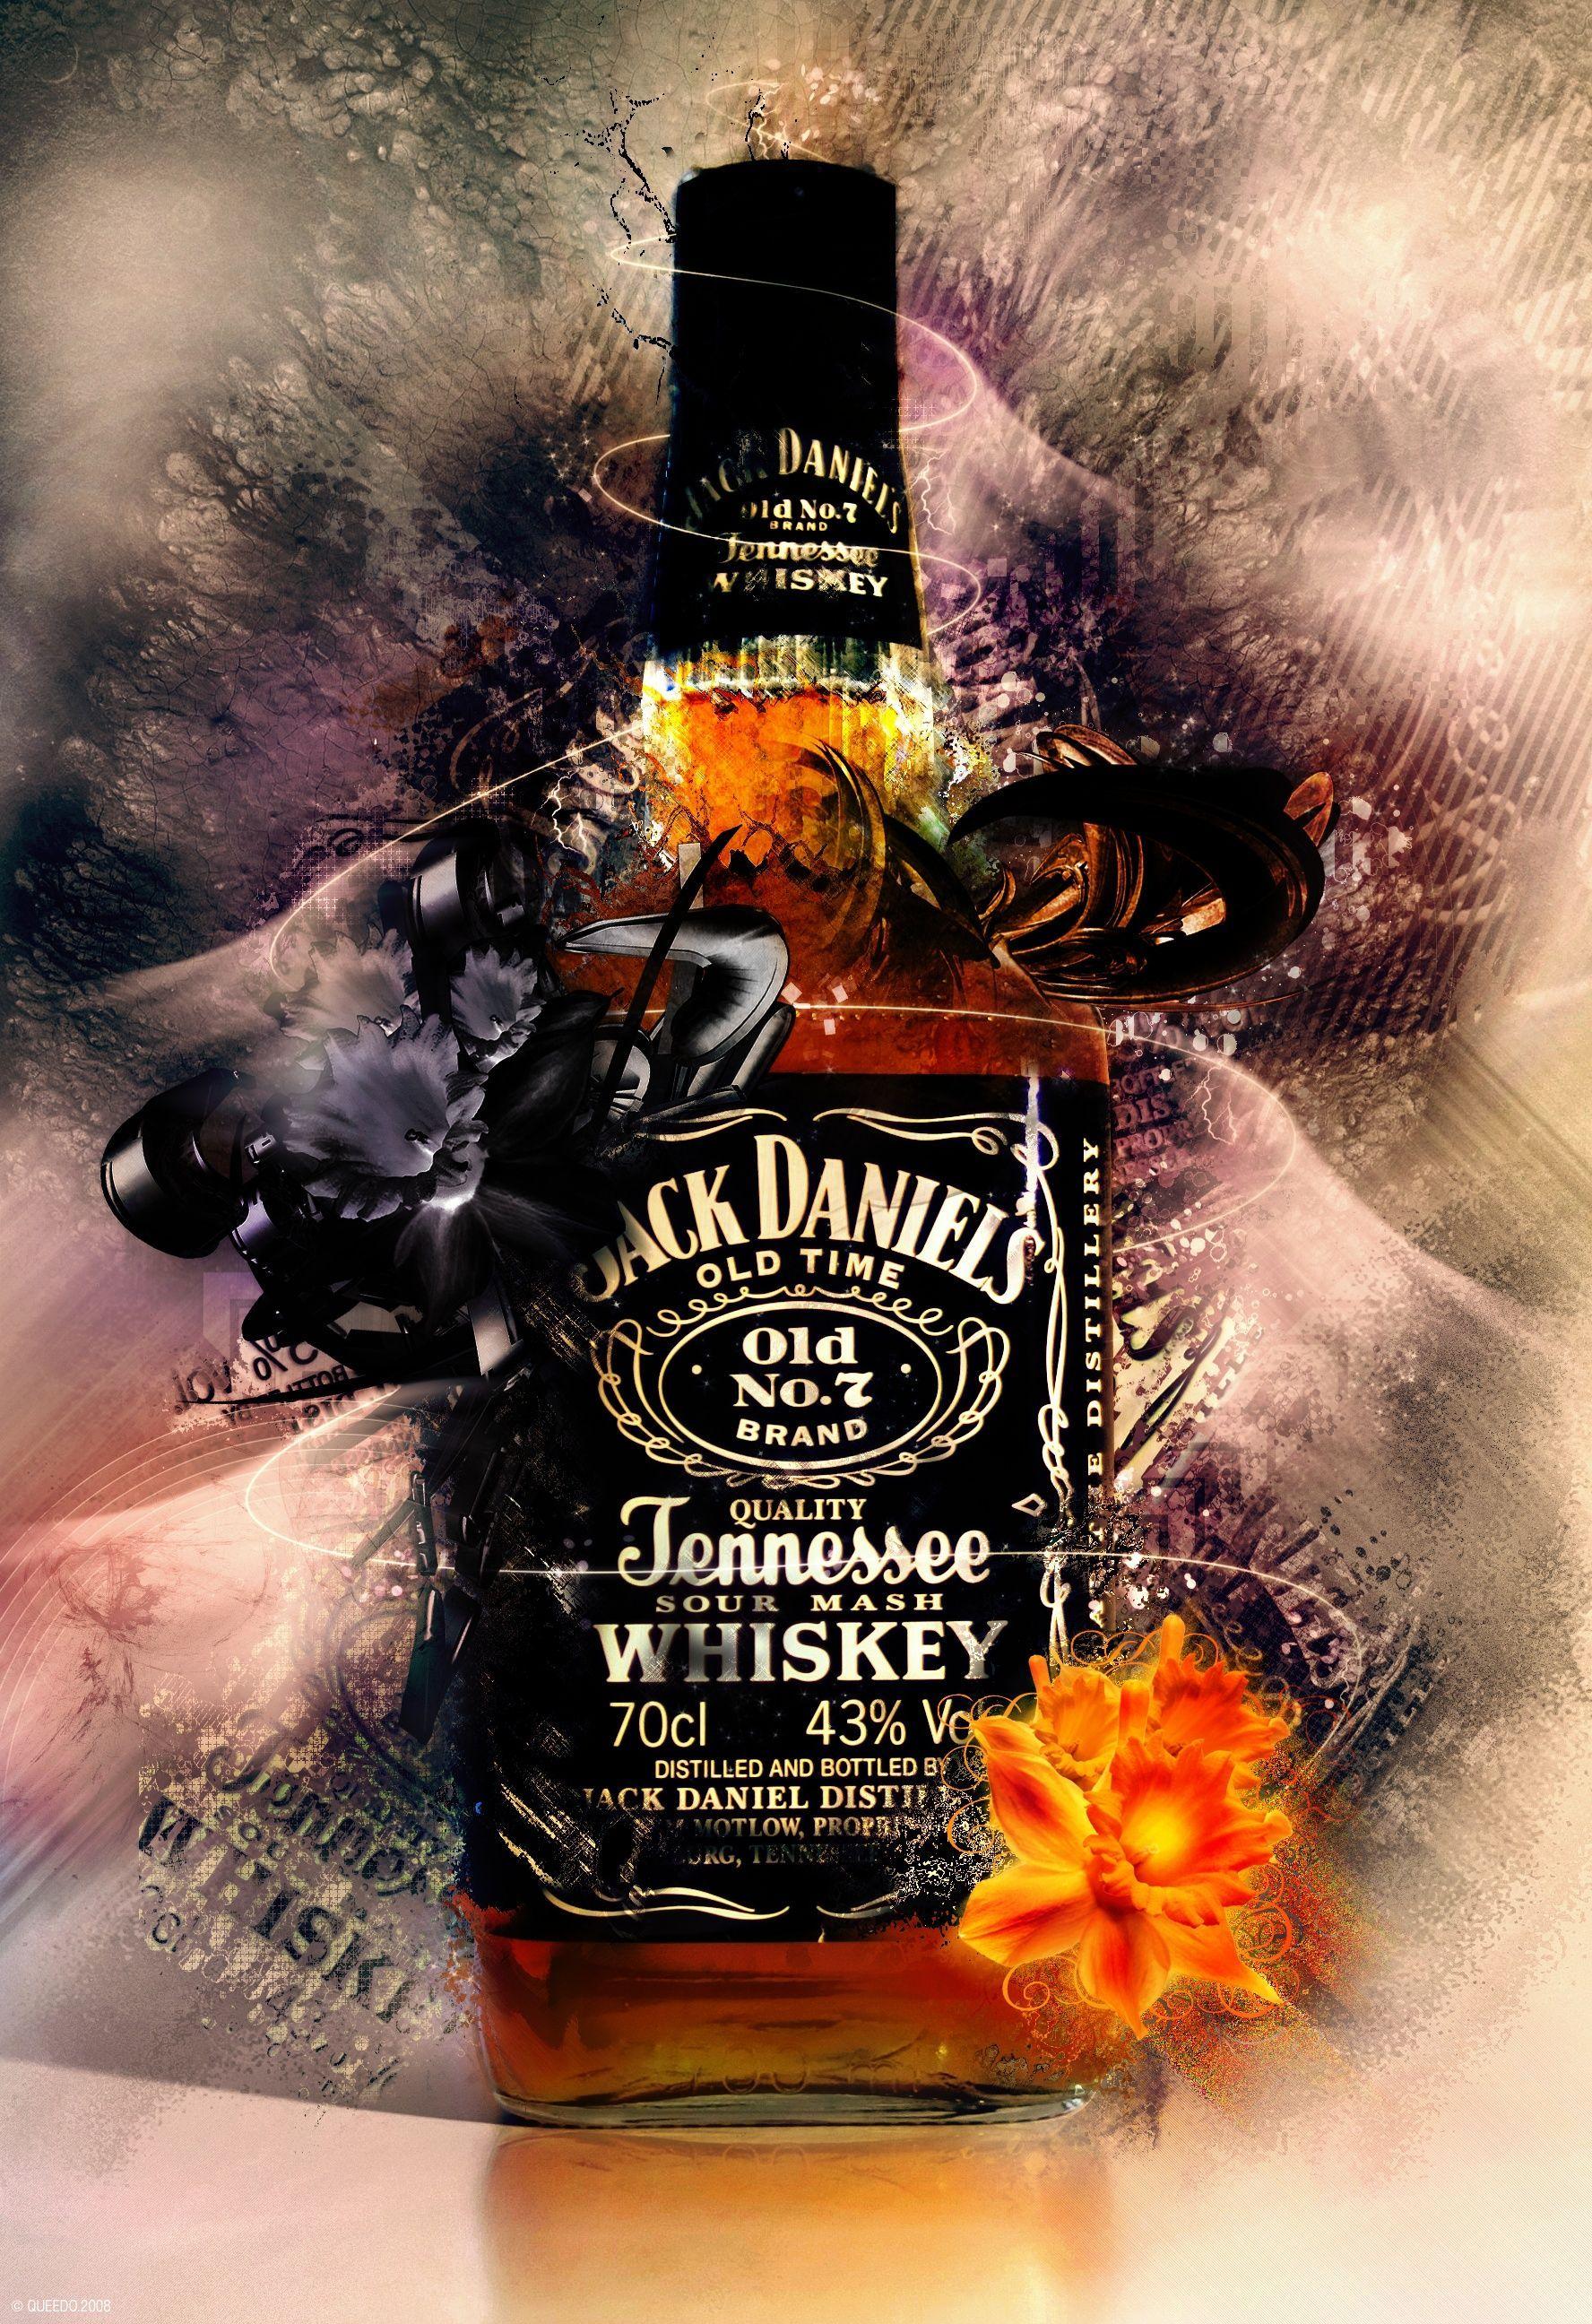 This Jack Daniel's bottle looks super cool. Great job to